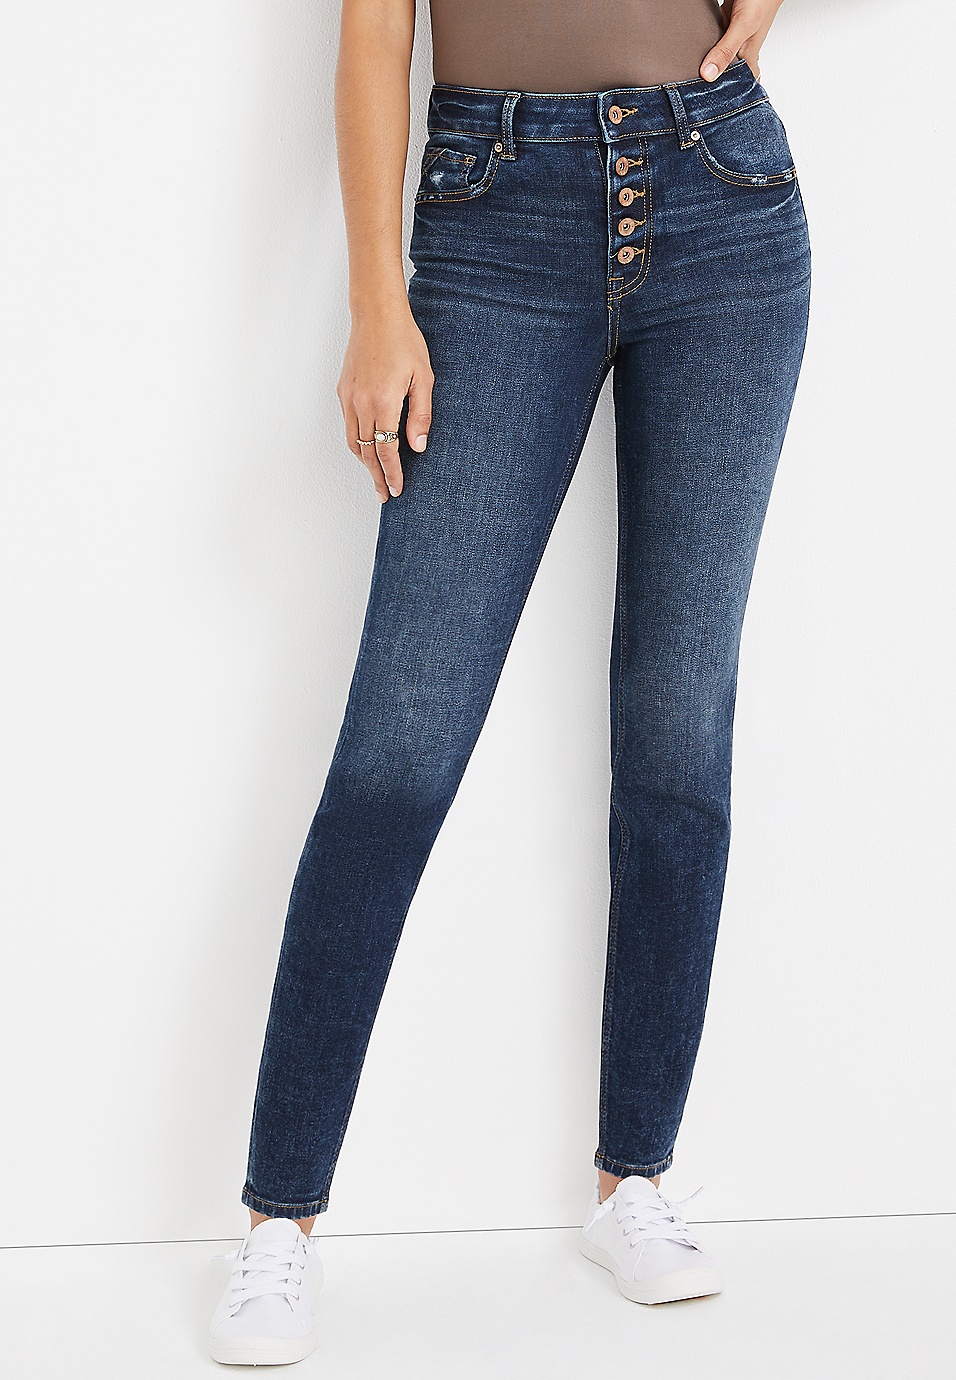 edgely™ Super Skinny High Rise Button Fly Jean